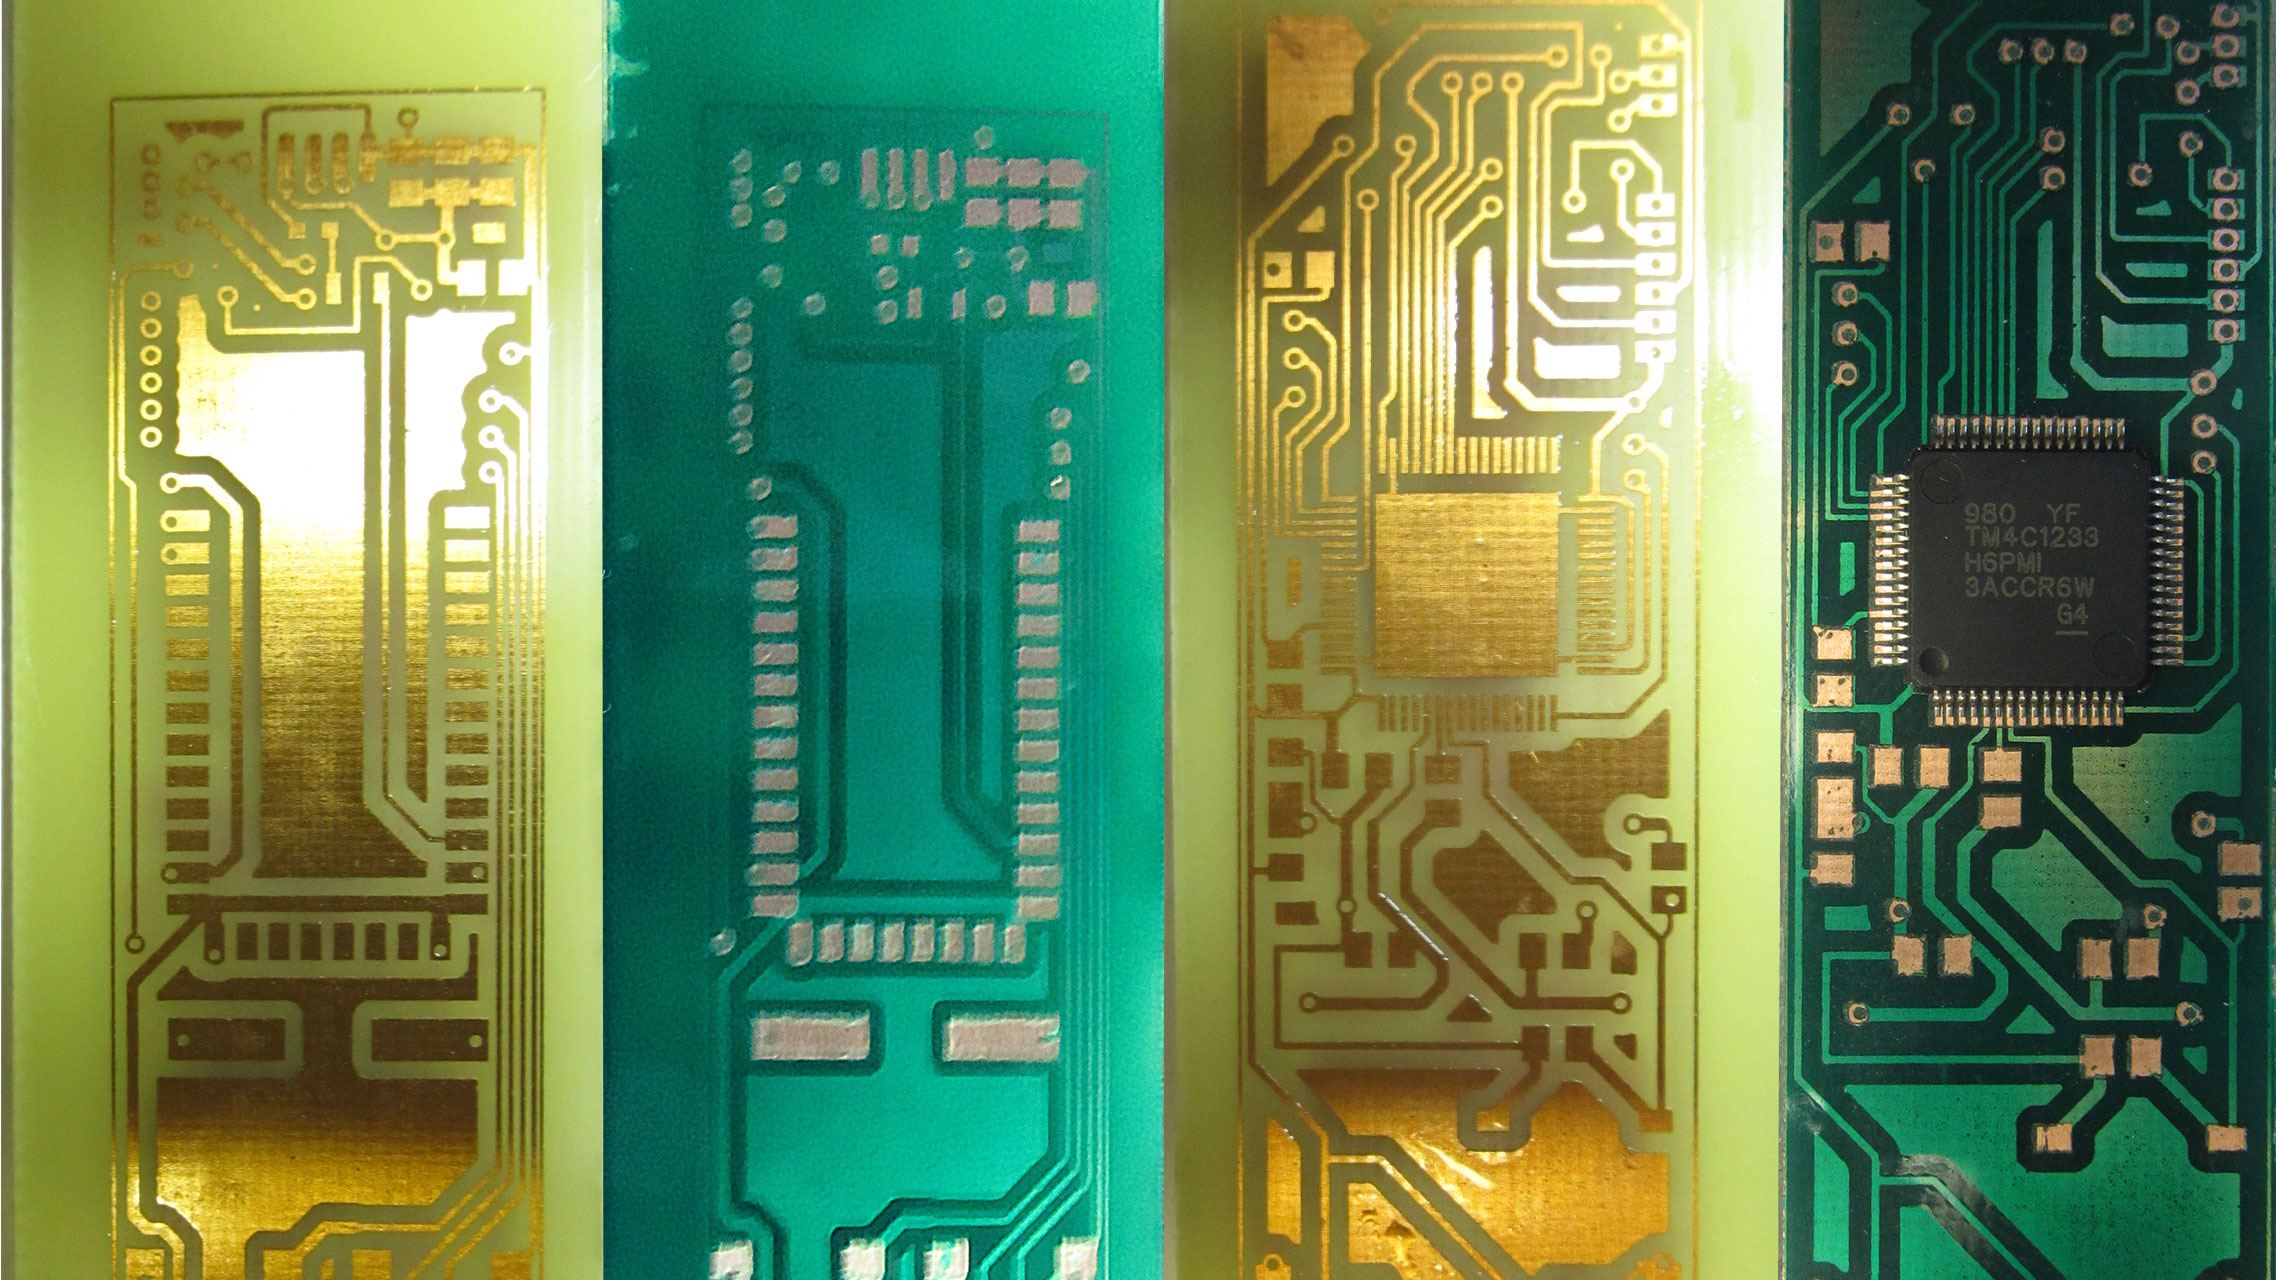 In-house PCB manufacturing